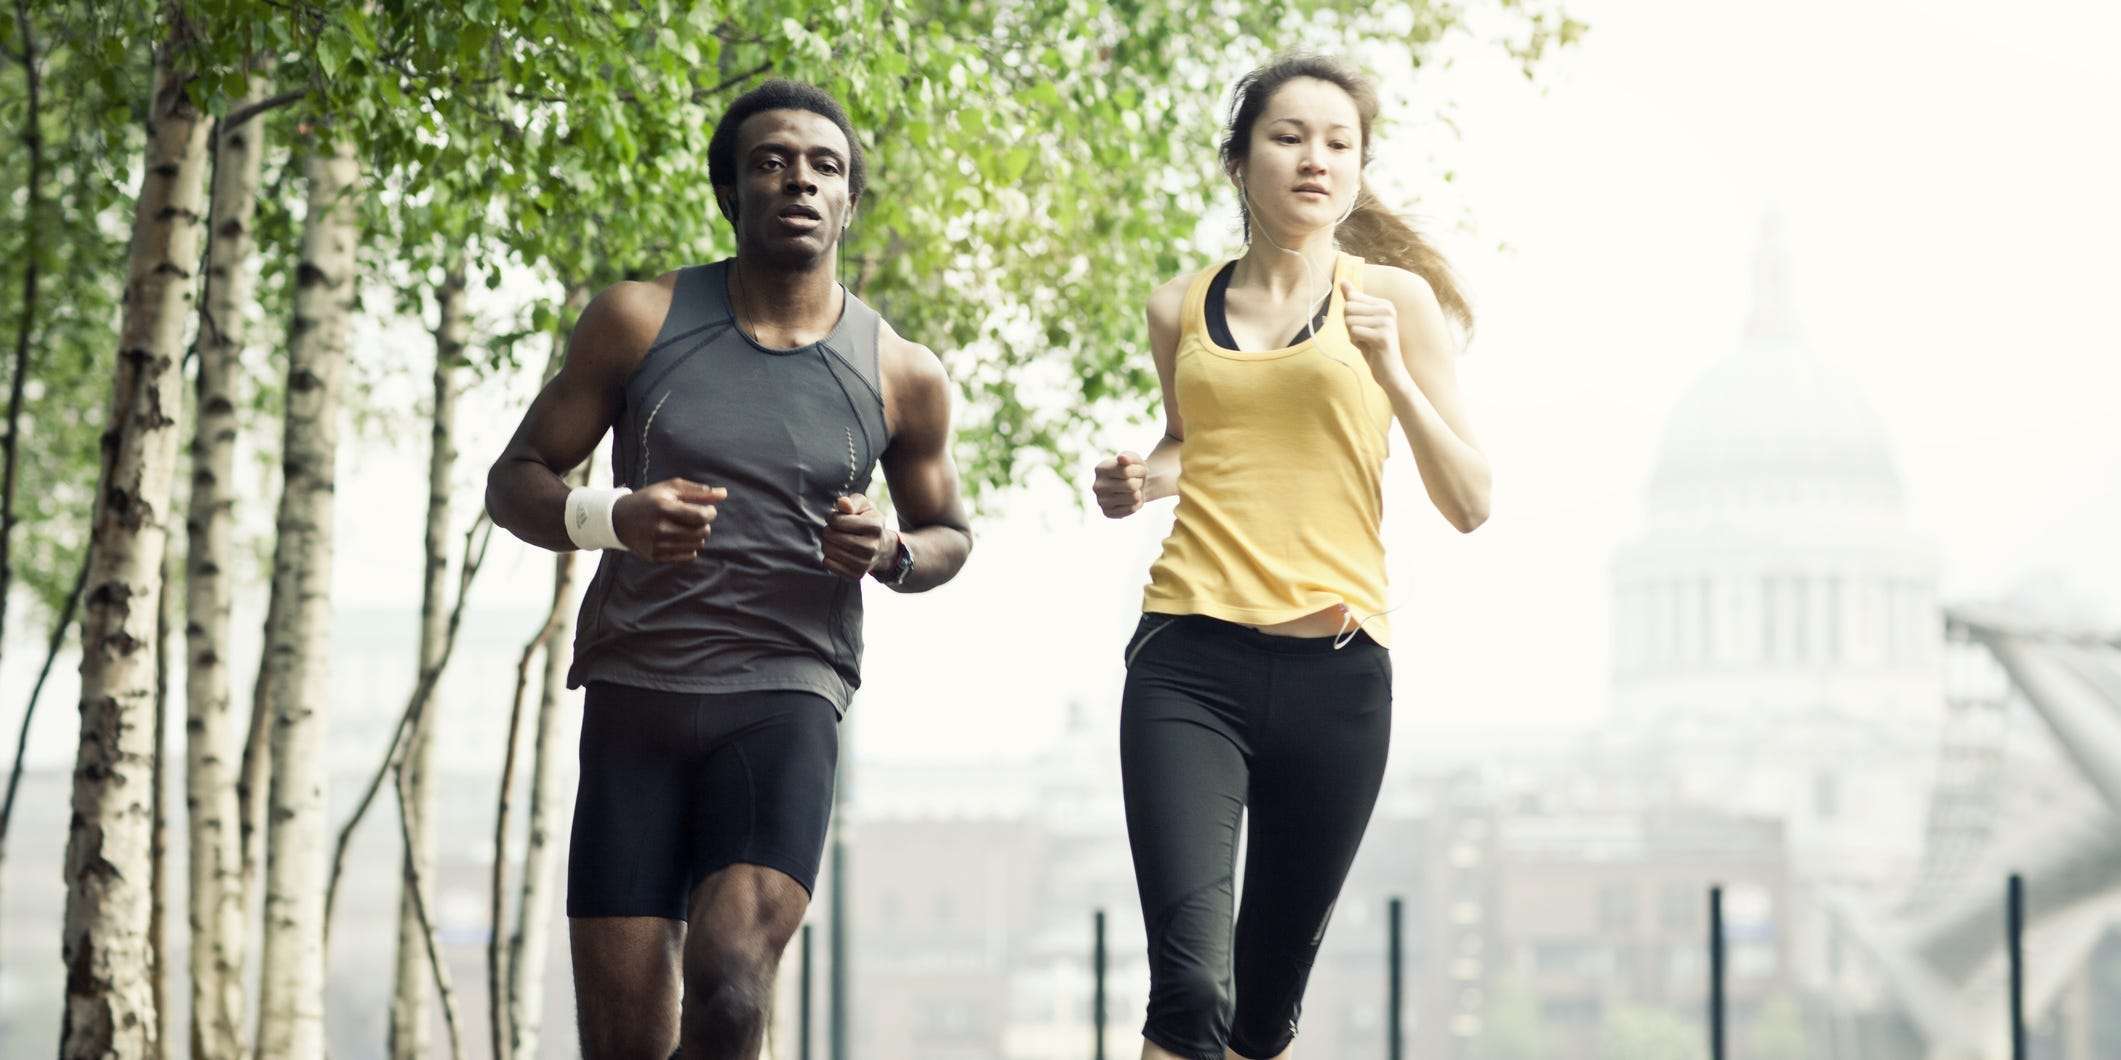 The Pros And Cons Of Running And Why The Benefits Often Outweigh The